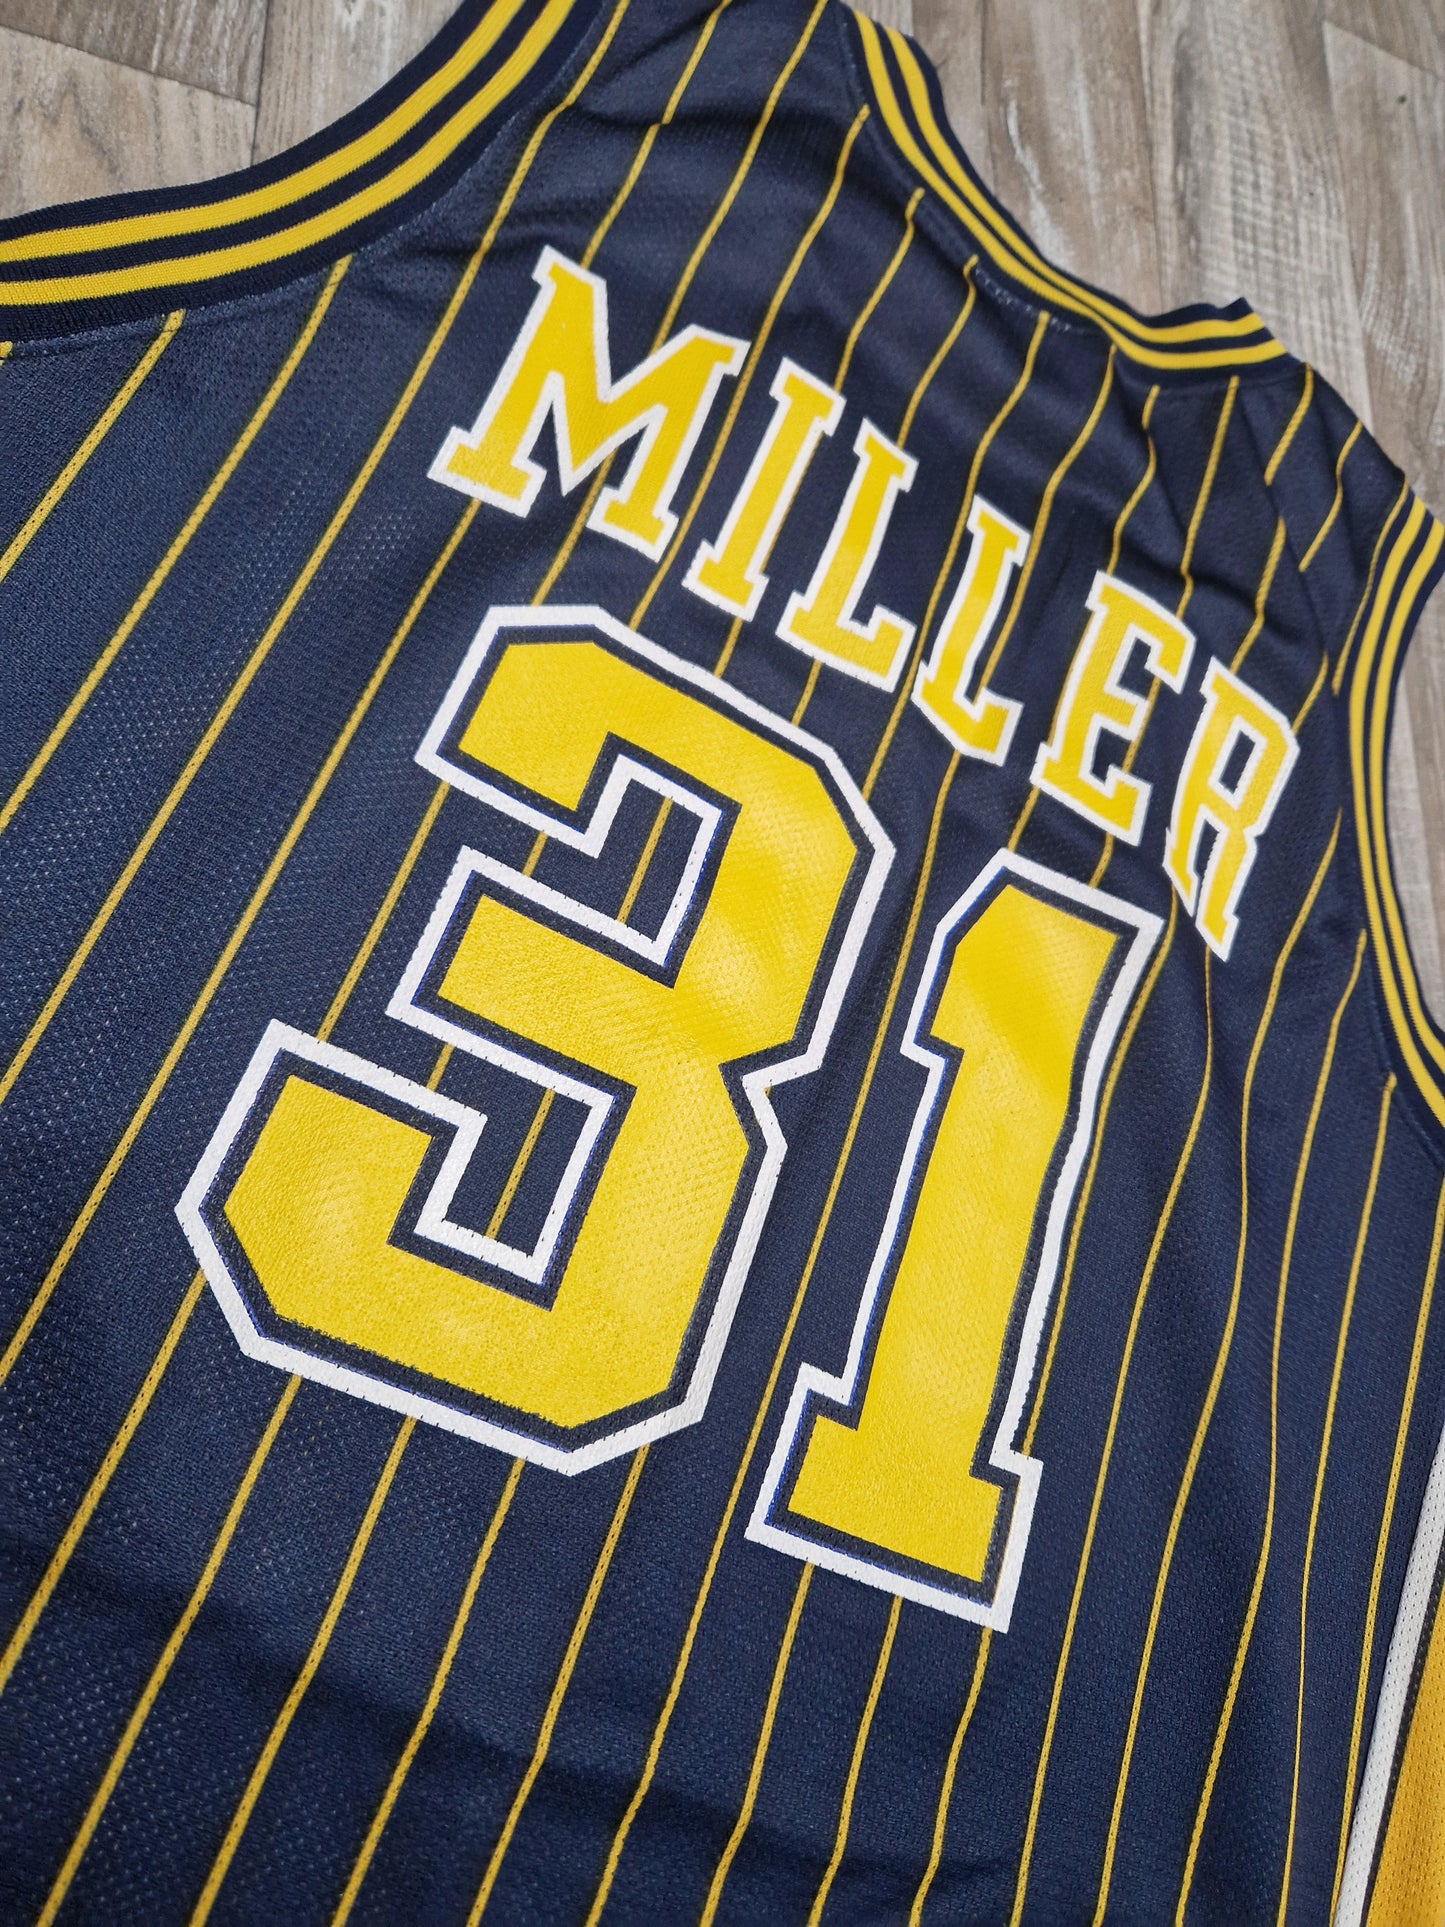 Reggie Miller Indiana Pacers Jersey Size Large